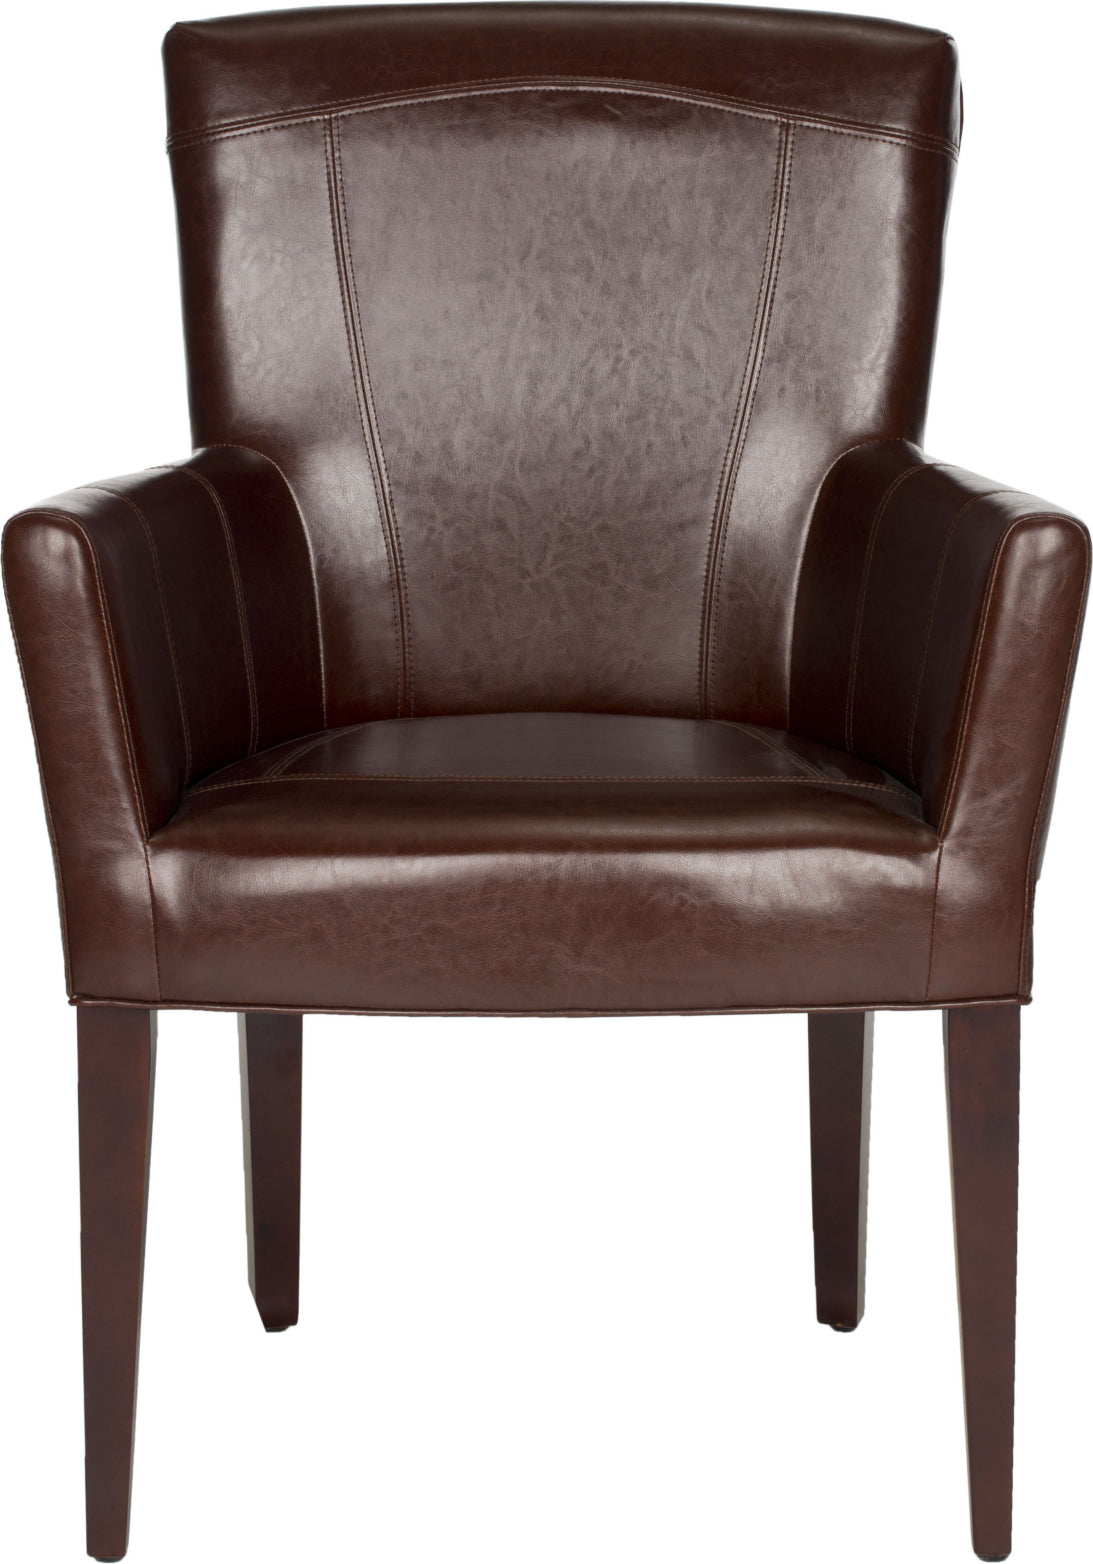 Safavieh Dale Arm Chair Brown and Cherry Mahogany Furniture main image